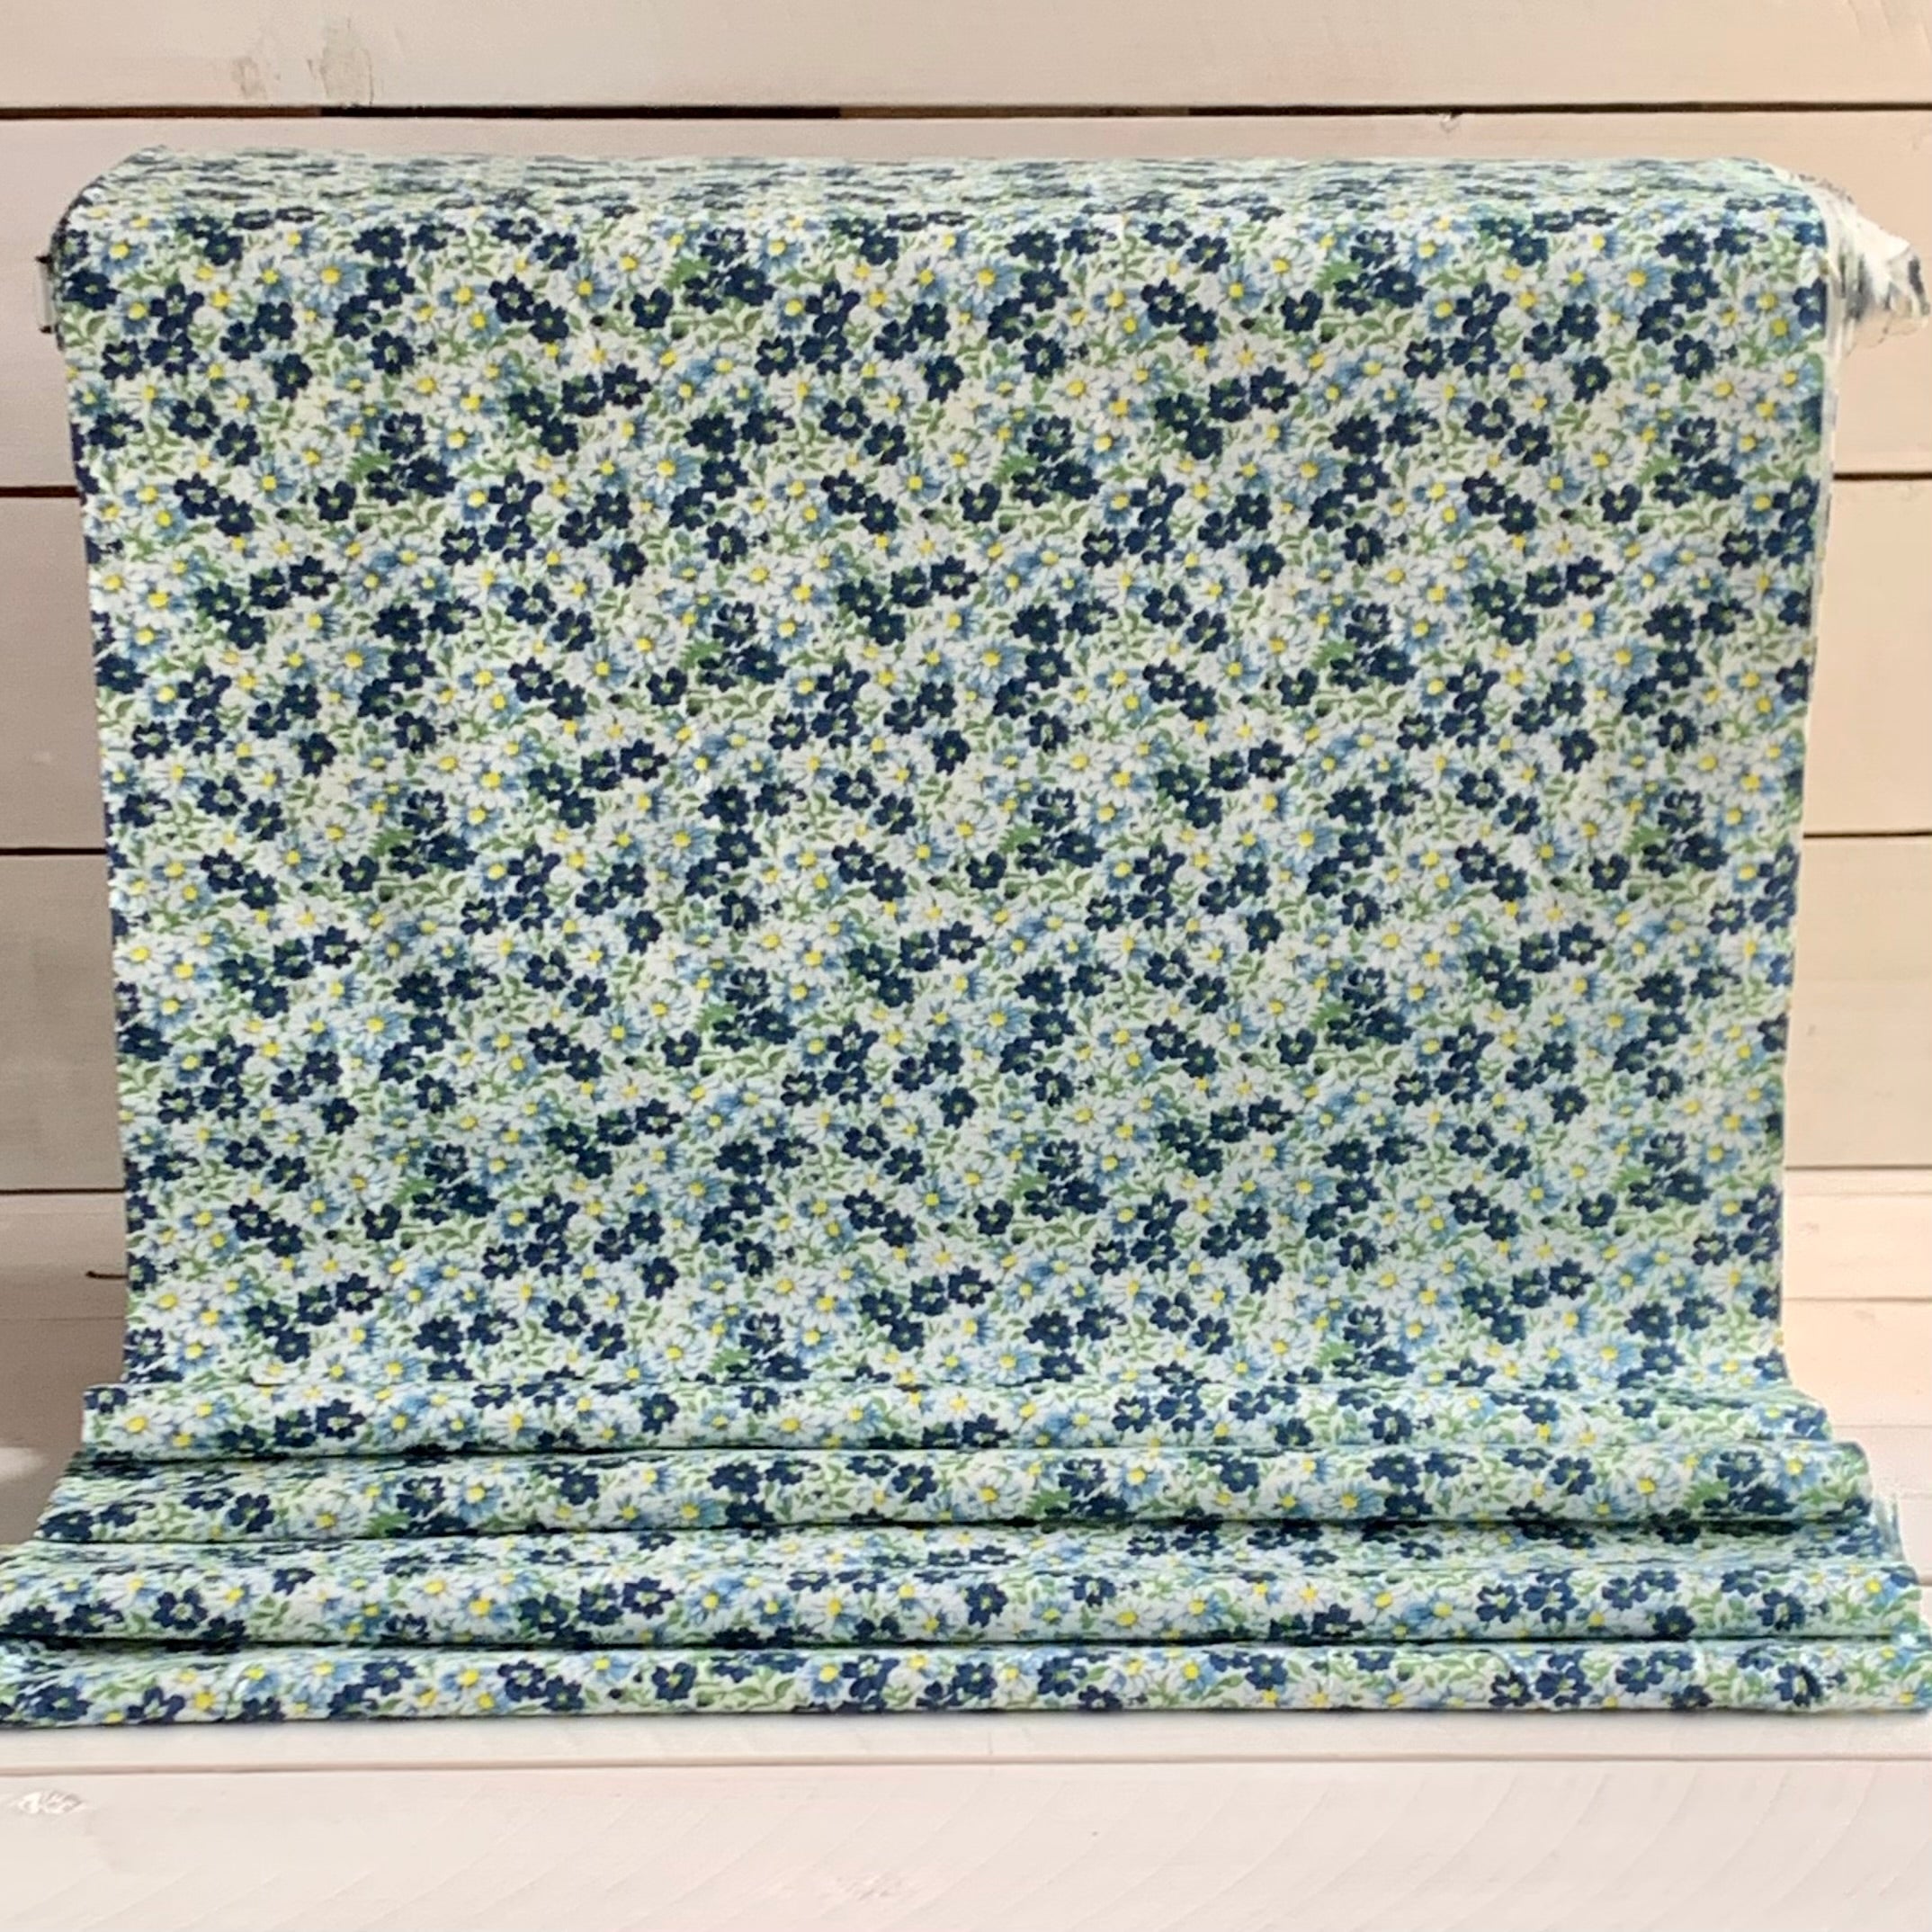 Reproduction Feed Sack Floral Fabric - Navy